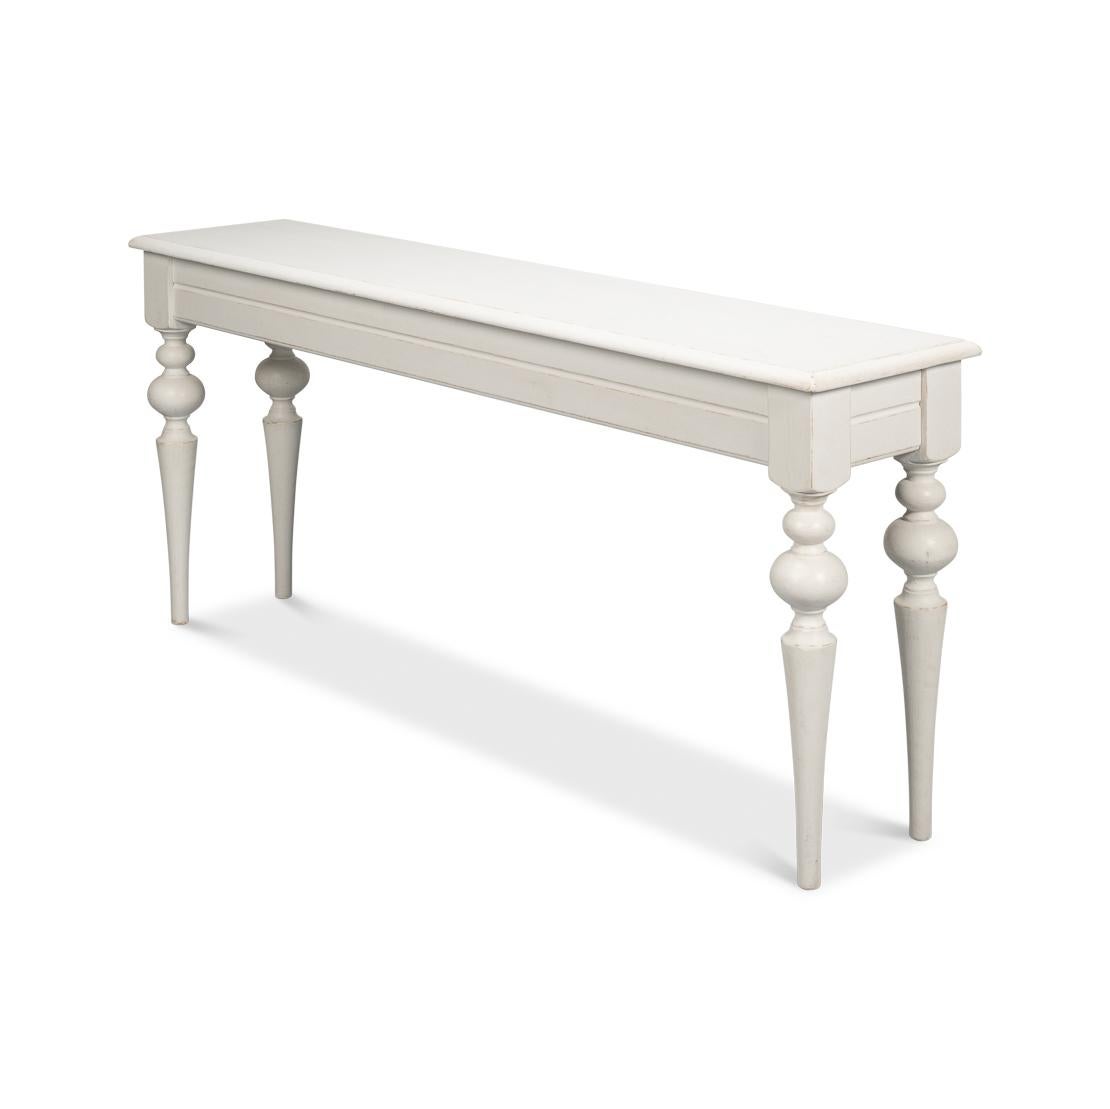 French Provincial Provincial Antique White Pine Console Table For Sale